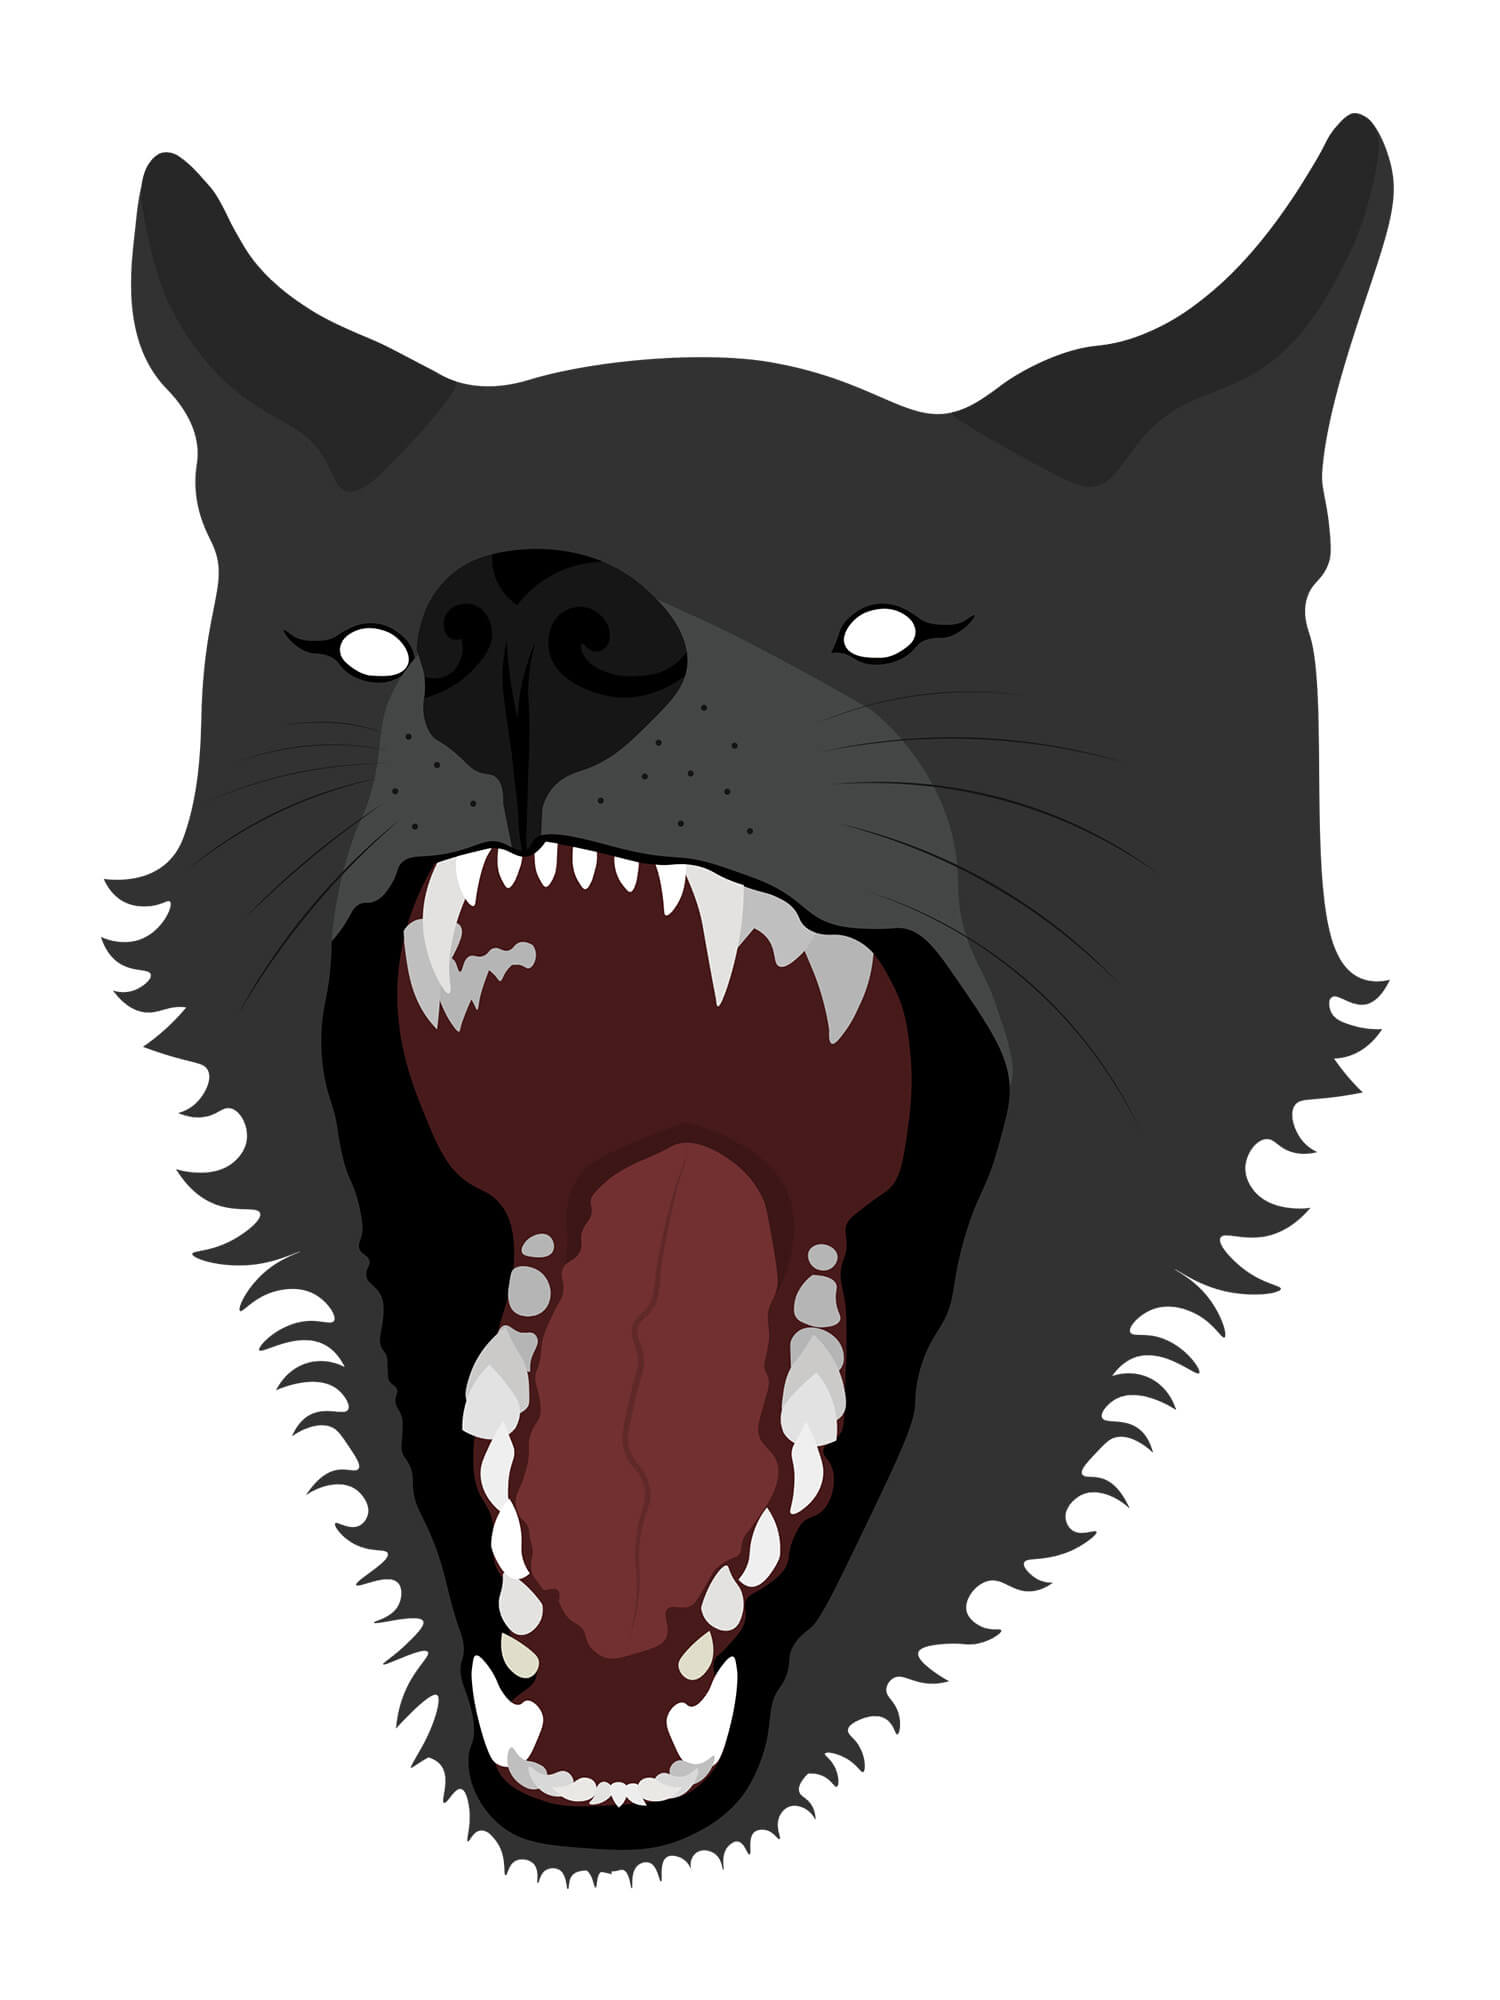 Illustrated wolf with an open mouth